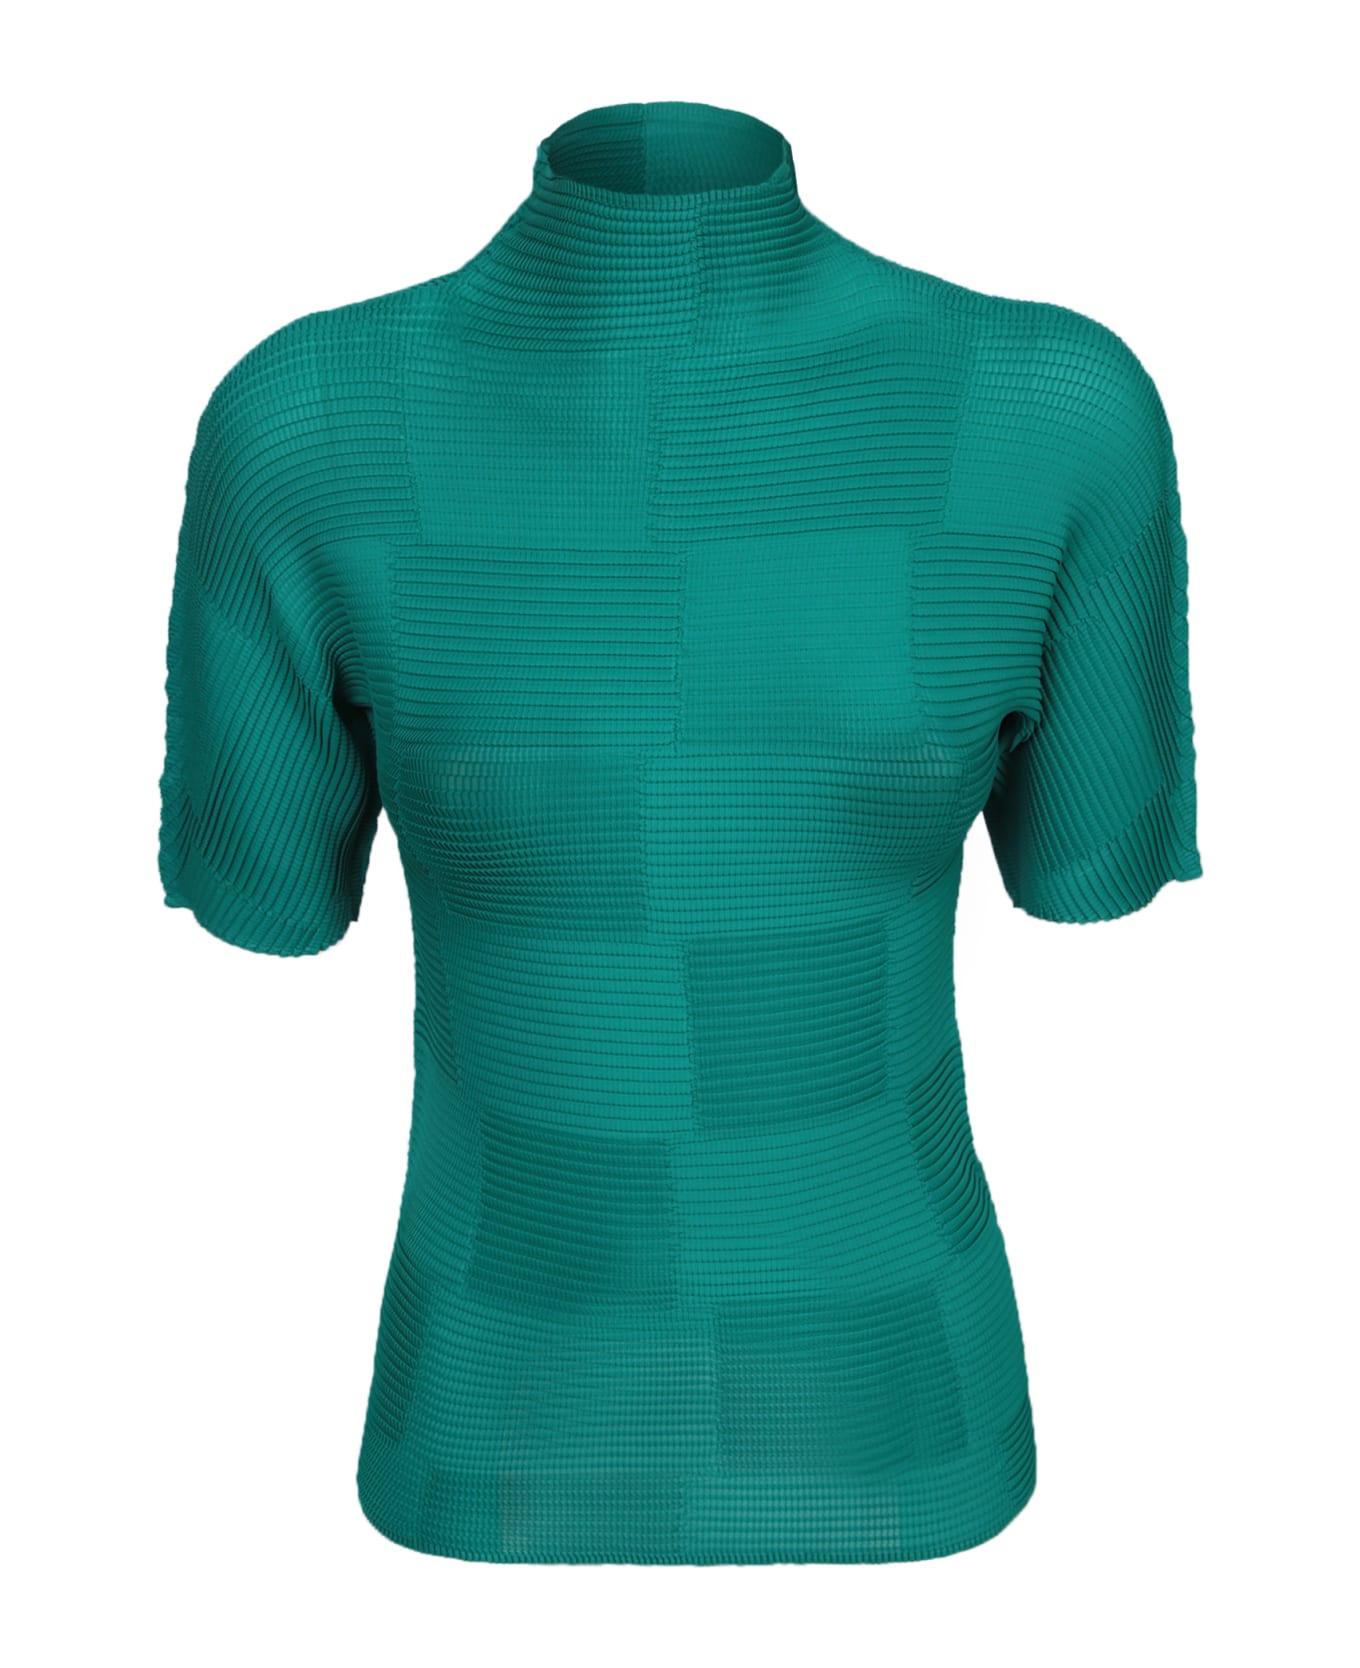 Issey Miyake Pleated Green Top - Green Tシャツ